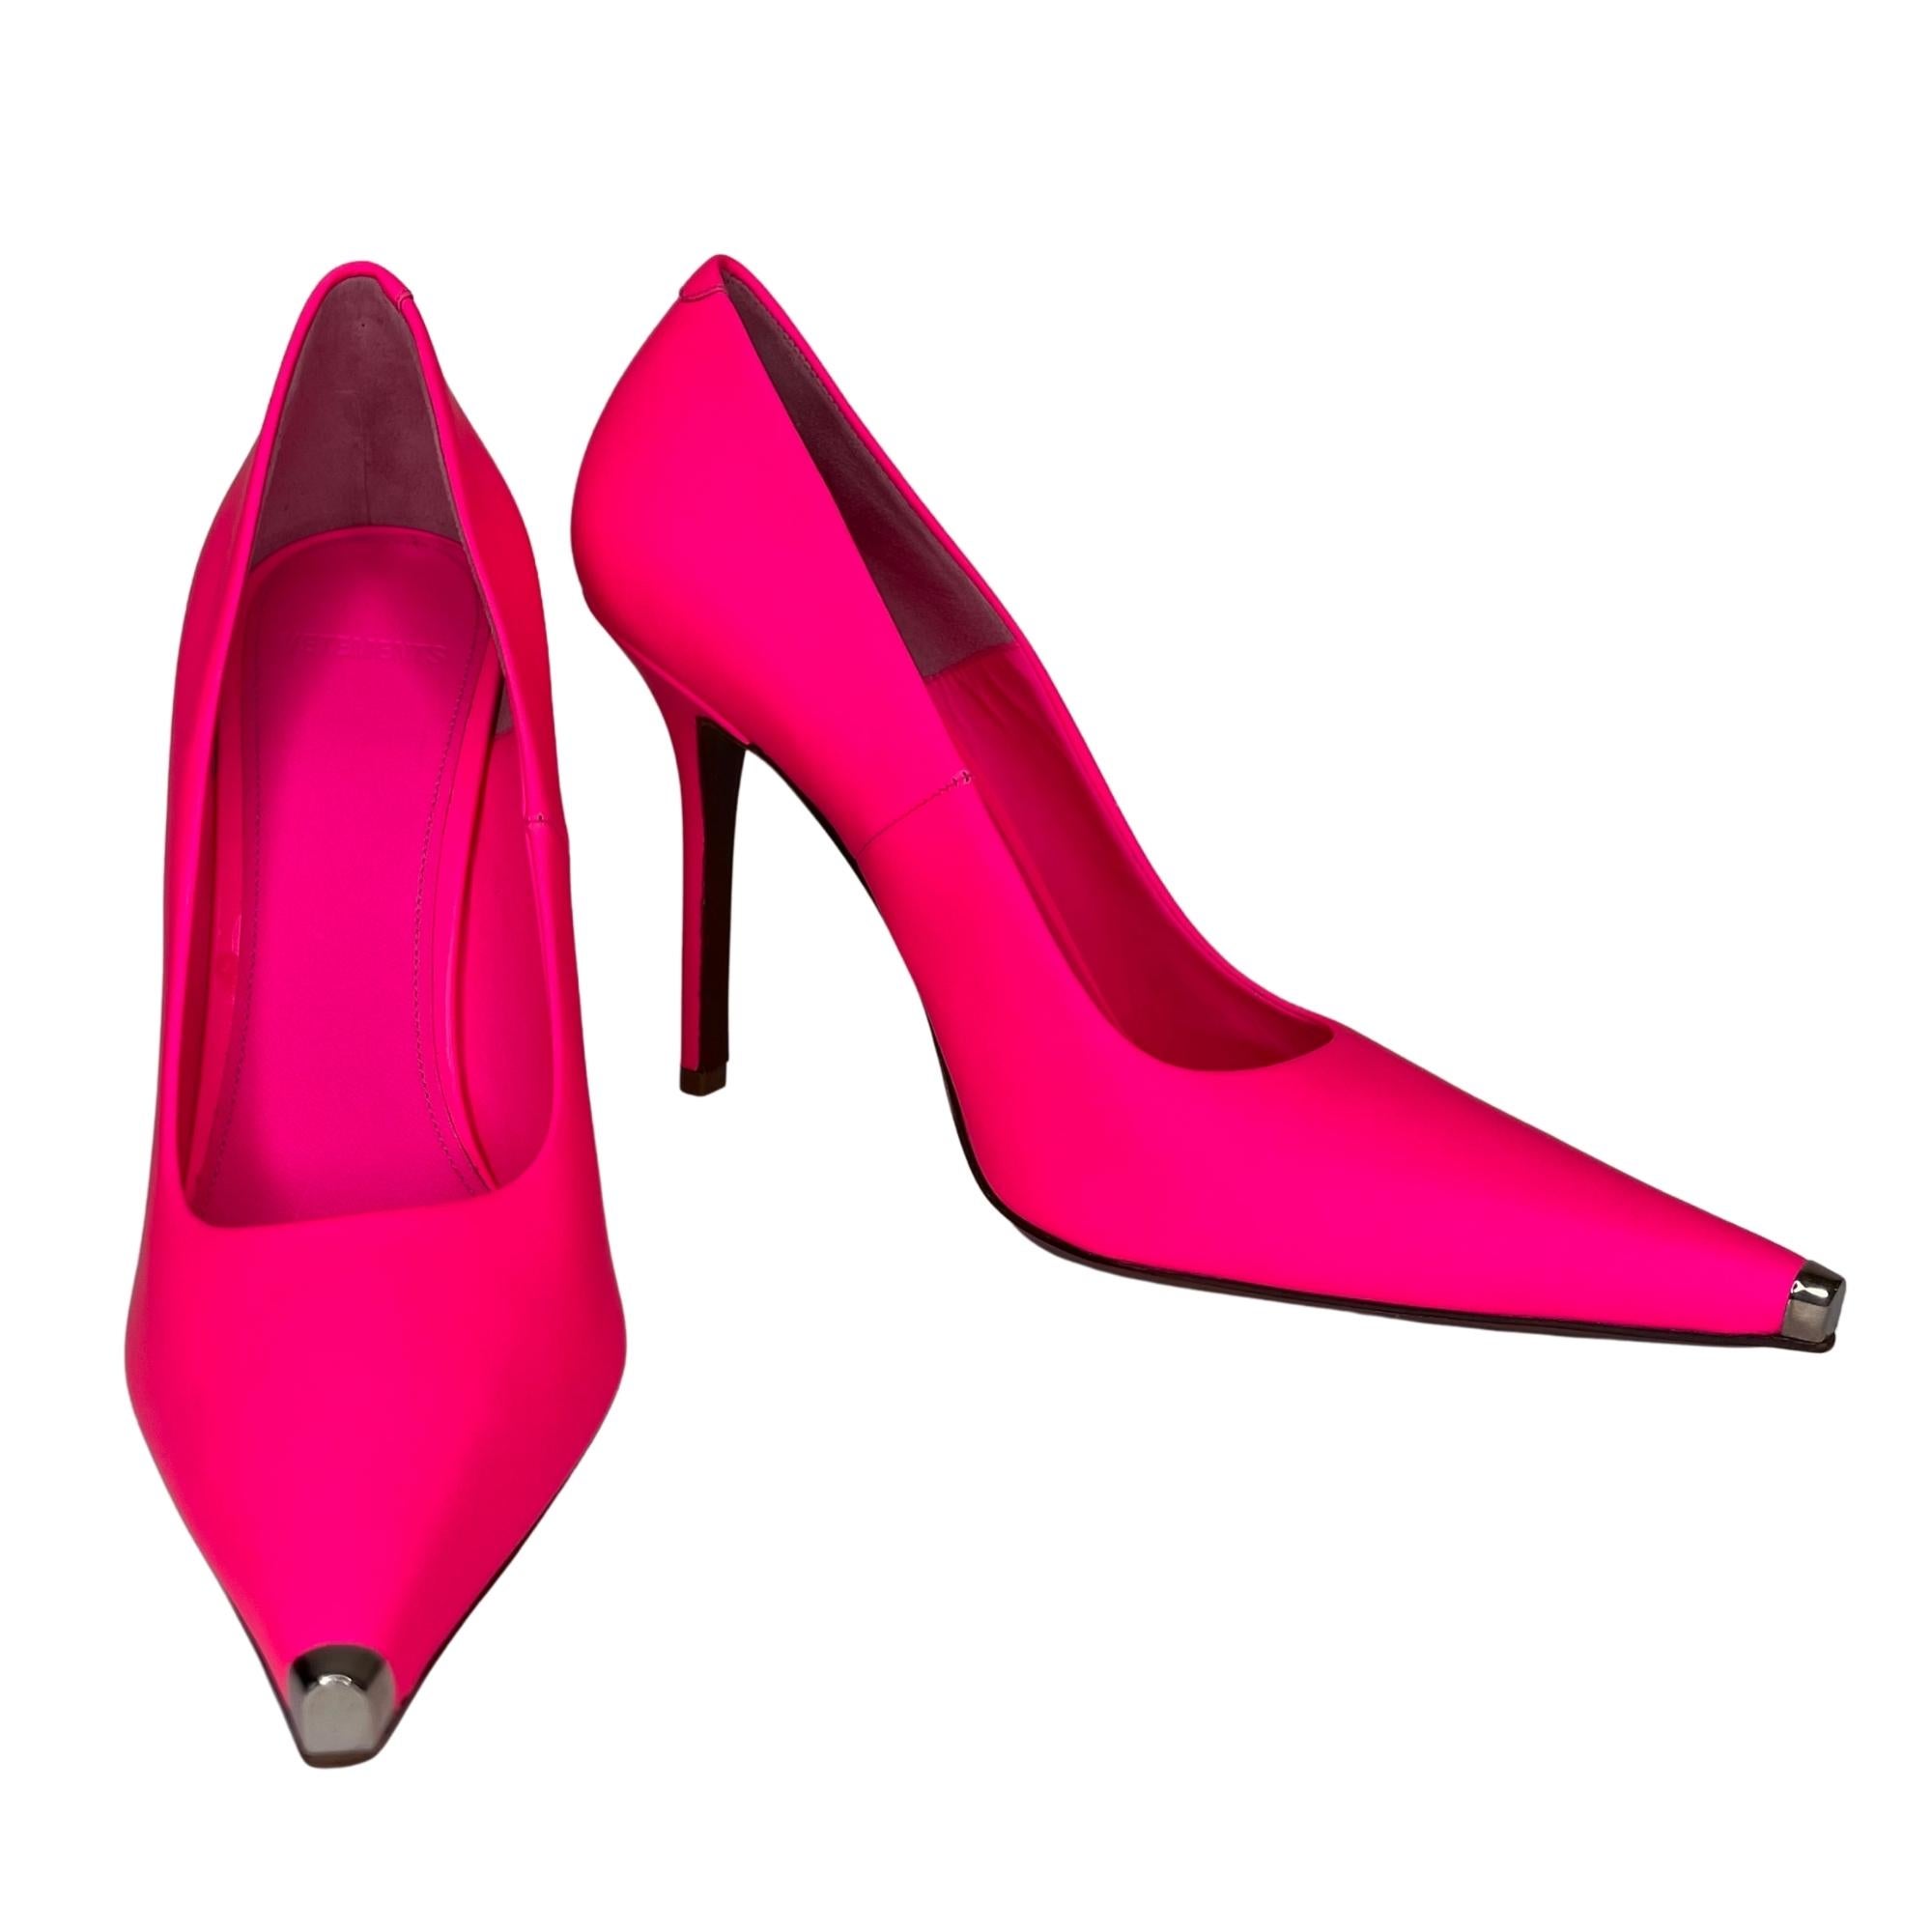 Pink leather 110-mm Décolleté pumps featuring a pointed toe, a slip-on style, a high stiletto heel, a gold-tone cap toe and leather sole and leather lining.
Designer Style ID: SS20HE009

COLOR: Pink
MATERIAL: Rubberized leather
SIZE: 37 EU / 6